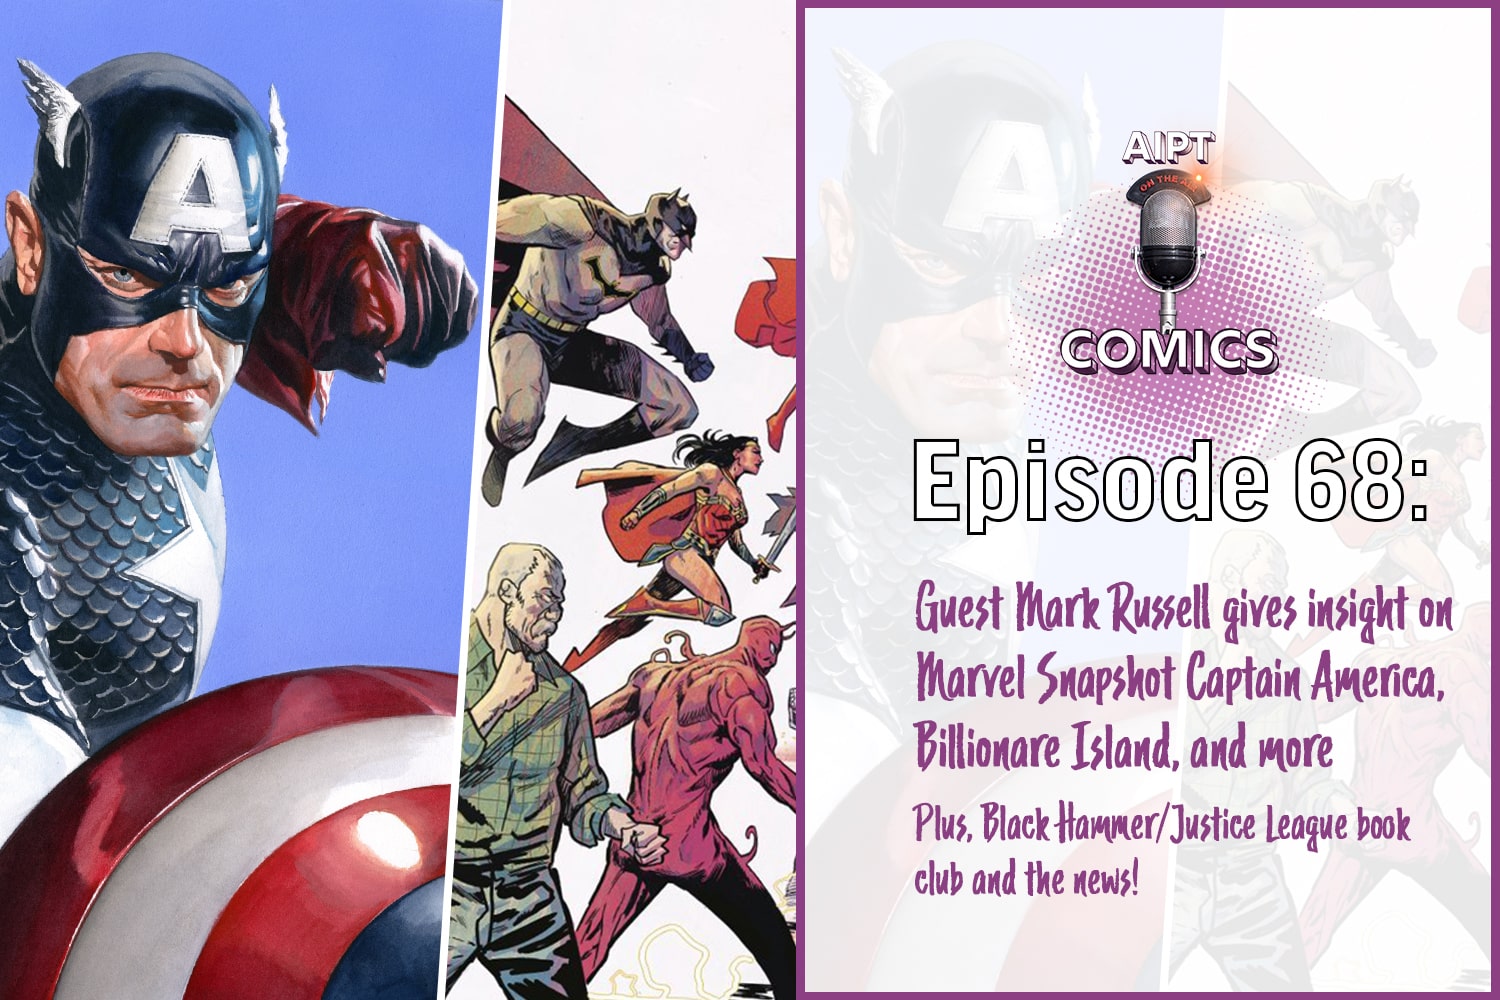 AIPT Comics Podcast Episode 68: Comics writer Mark Russell talks latest projects (at Marvel, DC, and Ahoy) and we analyze Black Hammer/Justice League